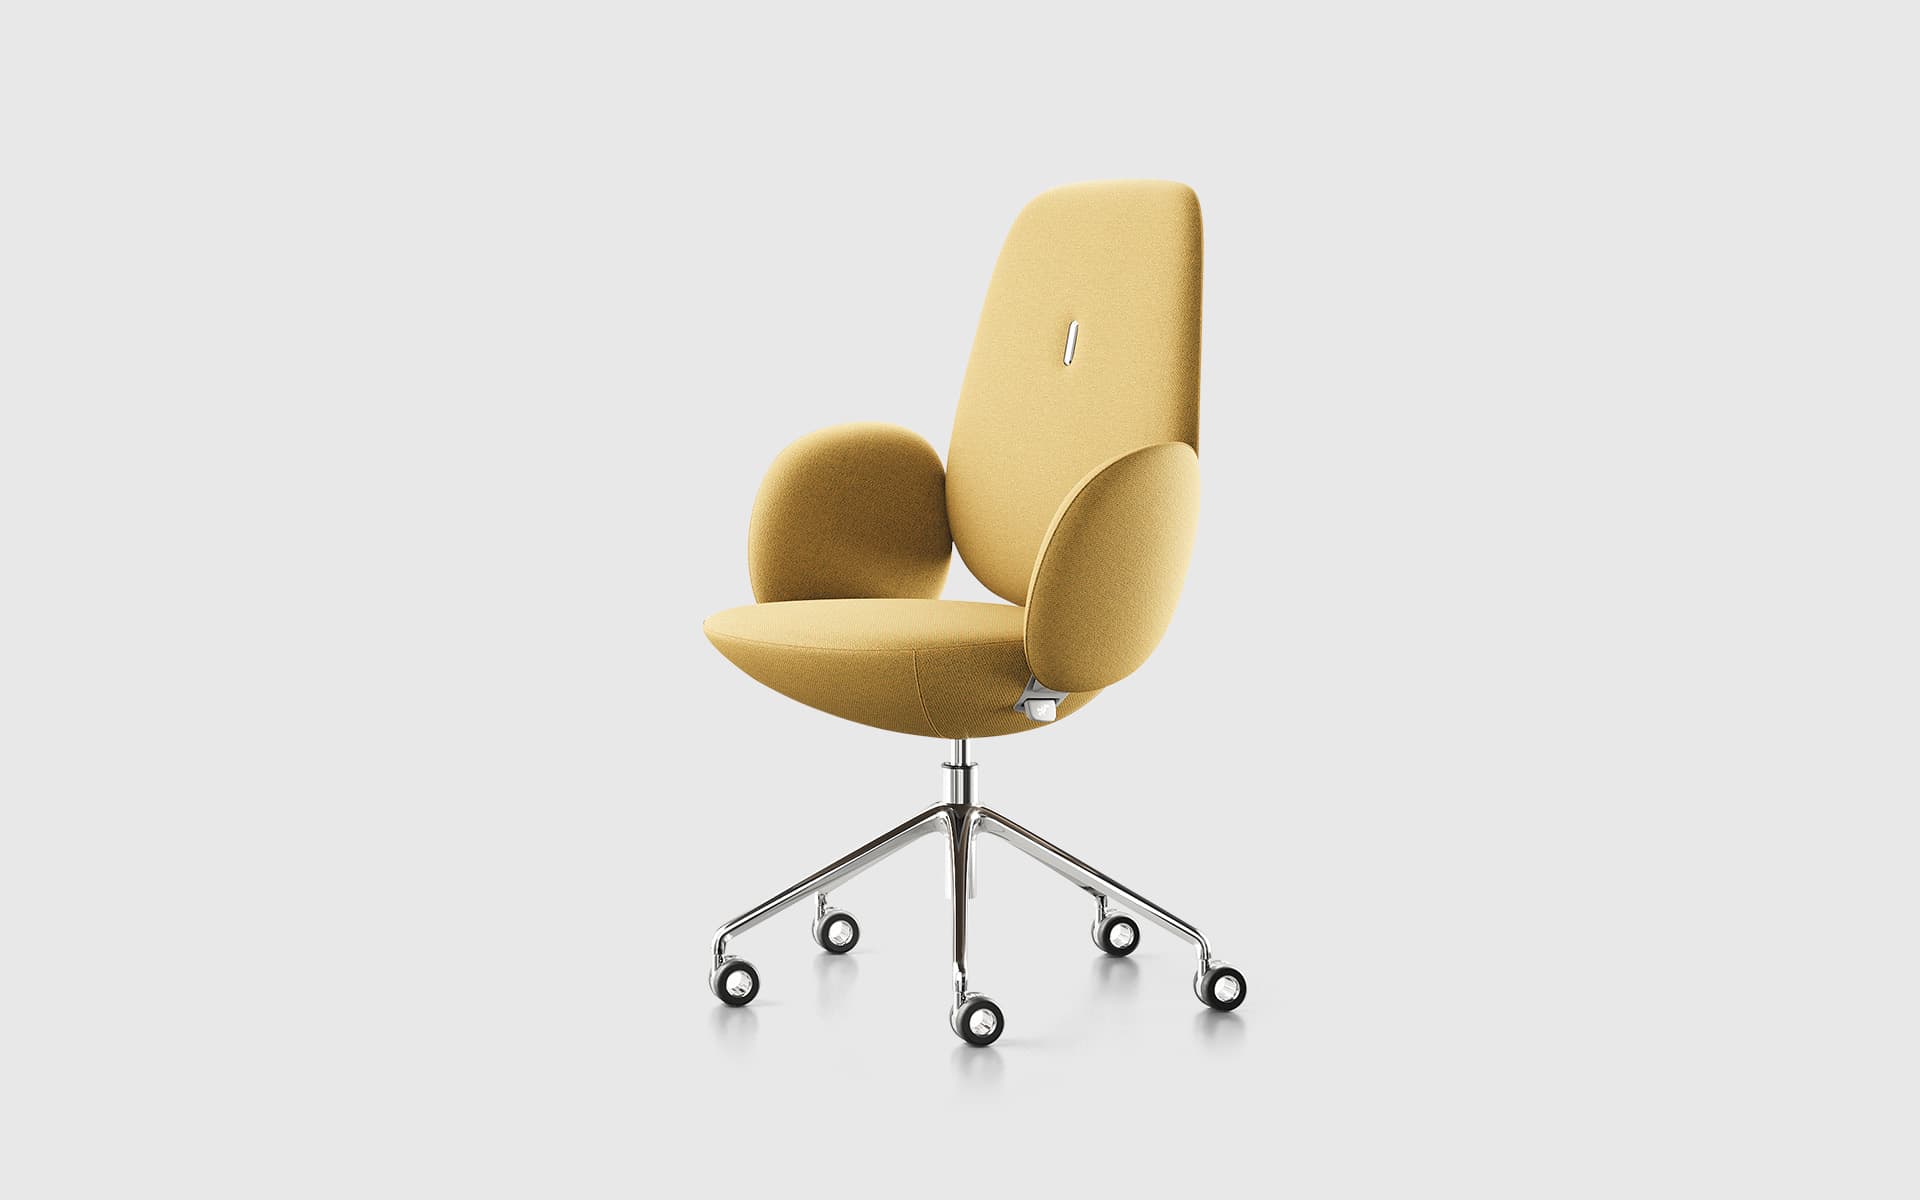 Tony office chair by ITO Design for Henglin in dark yellow